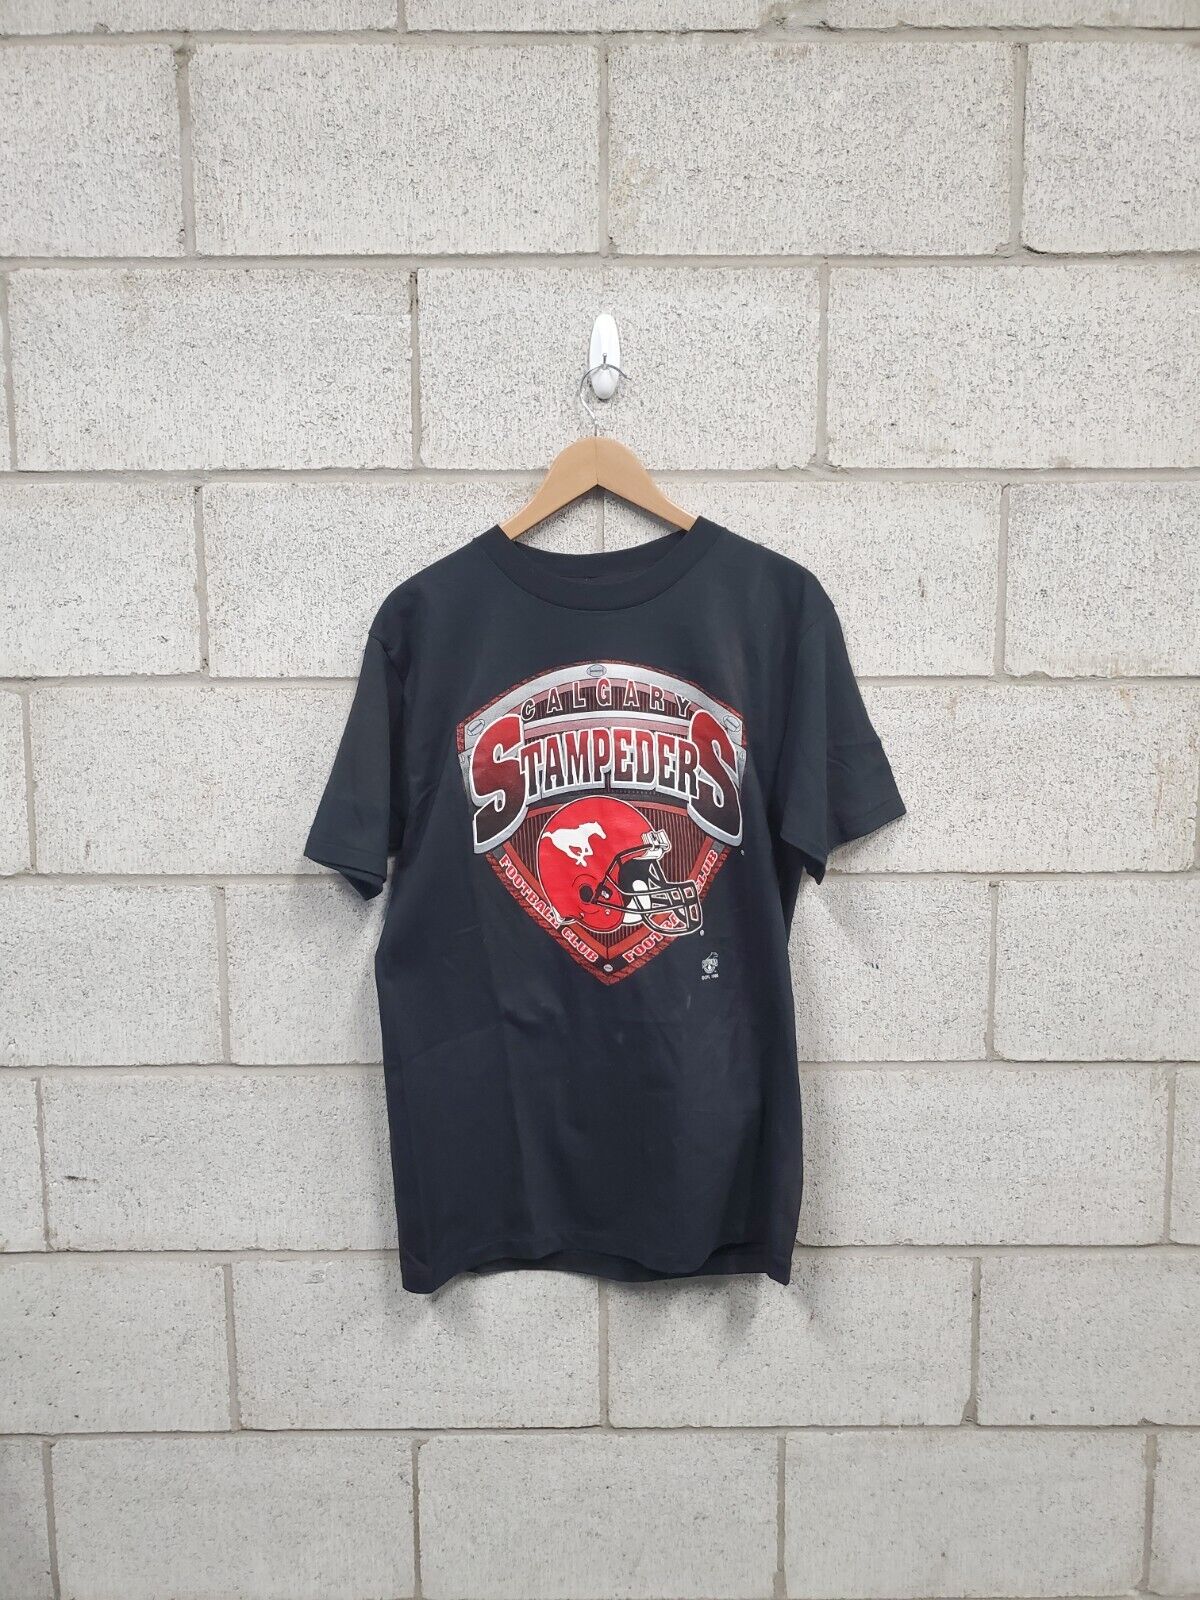 Mens Vintage 1995 Calgary Stampeders T-Shirt Size Large NWT